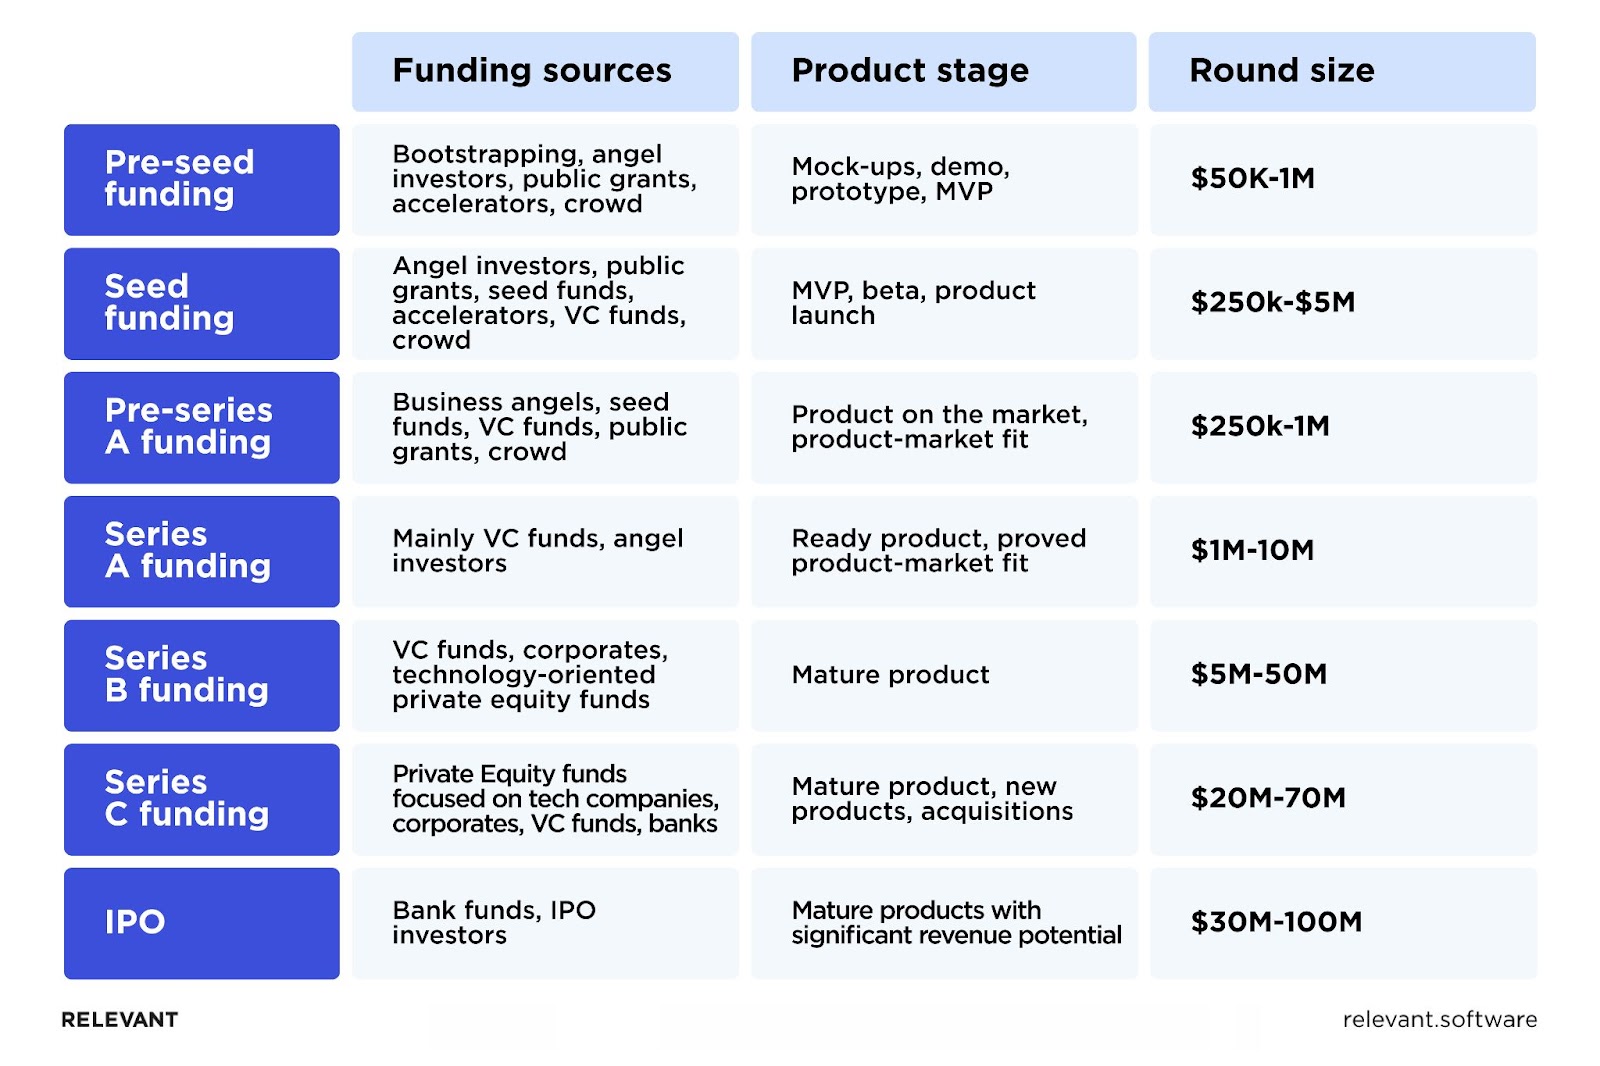 Startup Funding Rounds